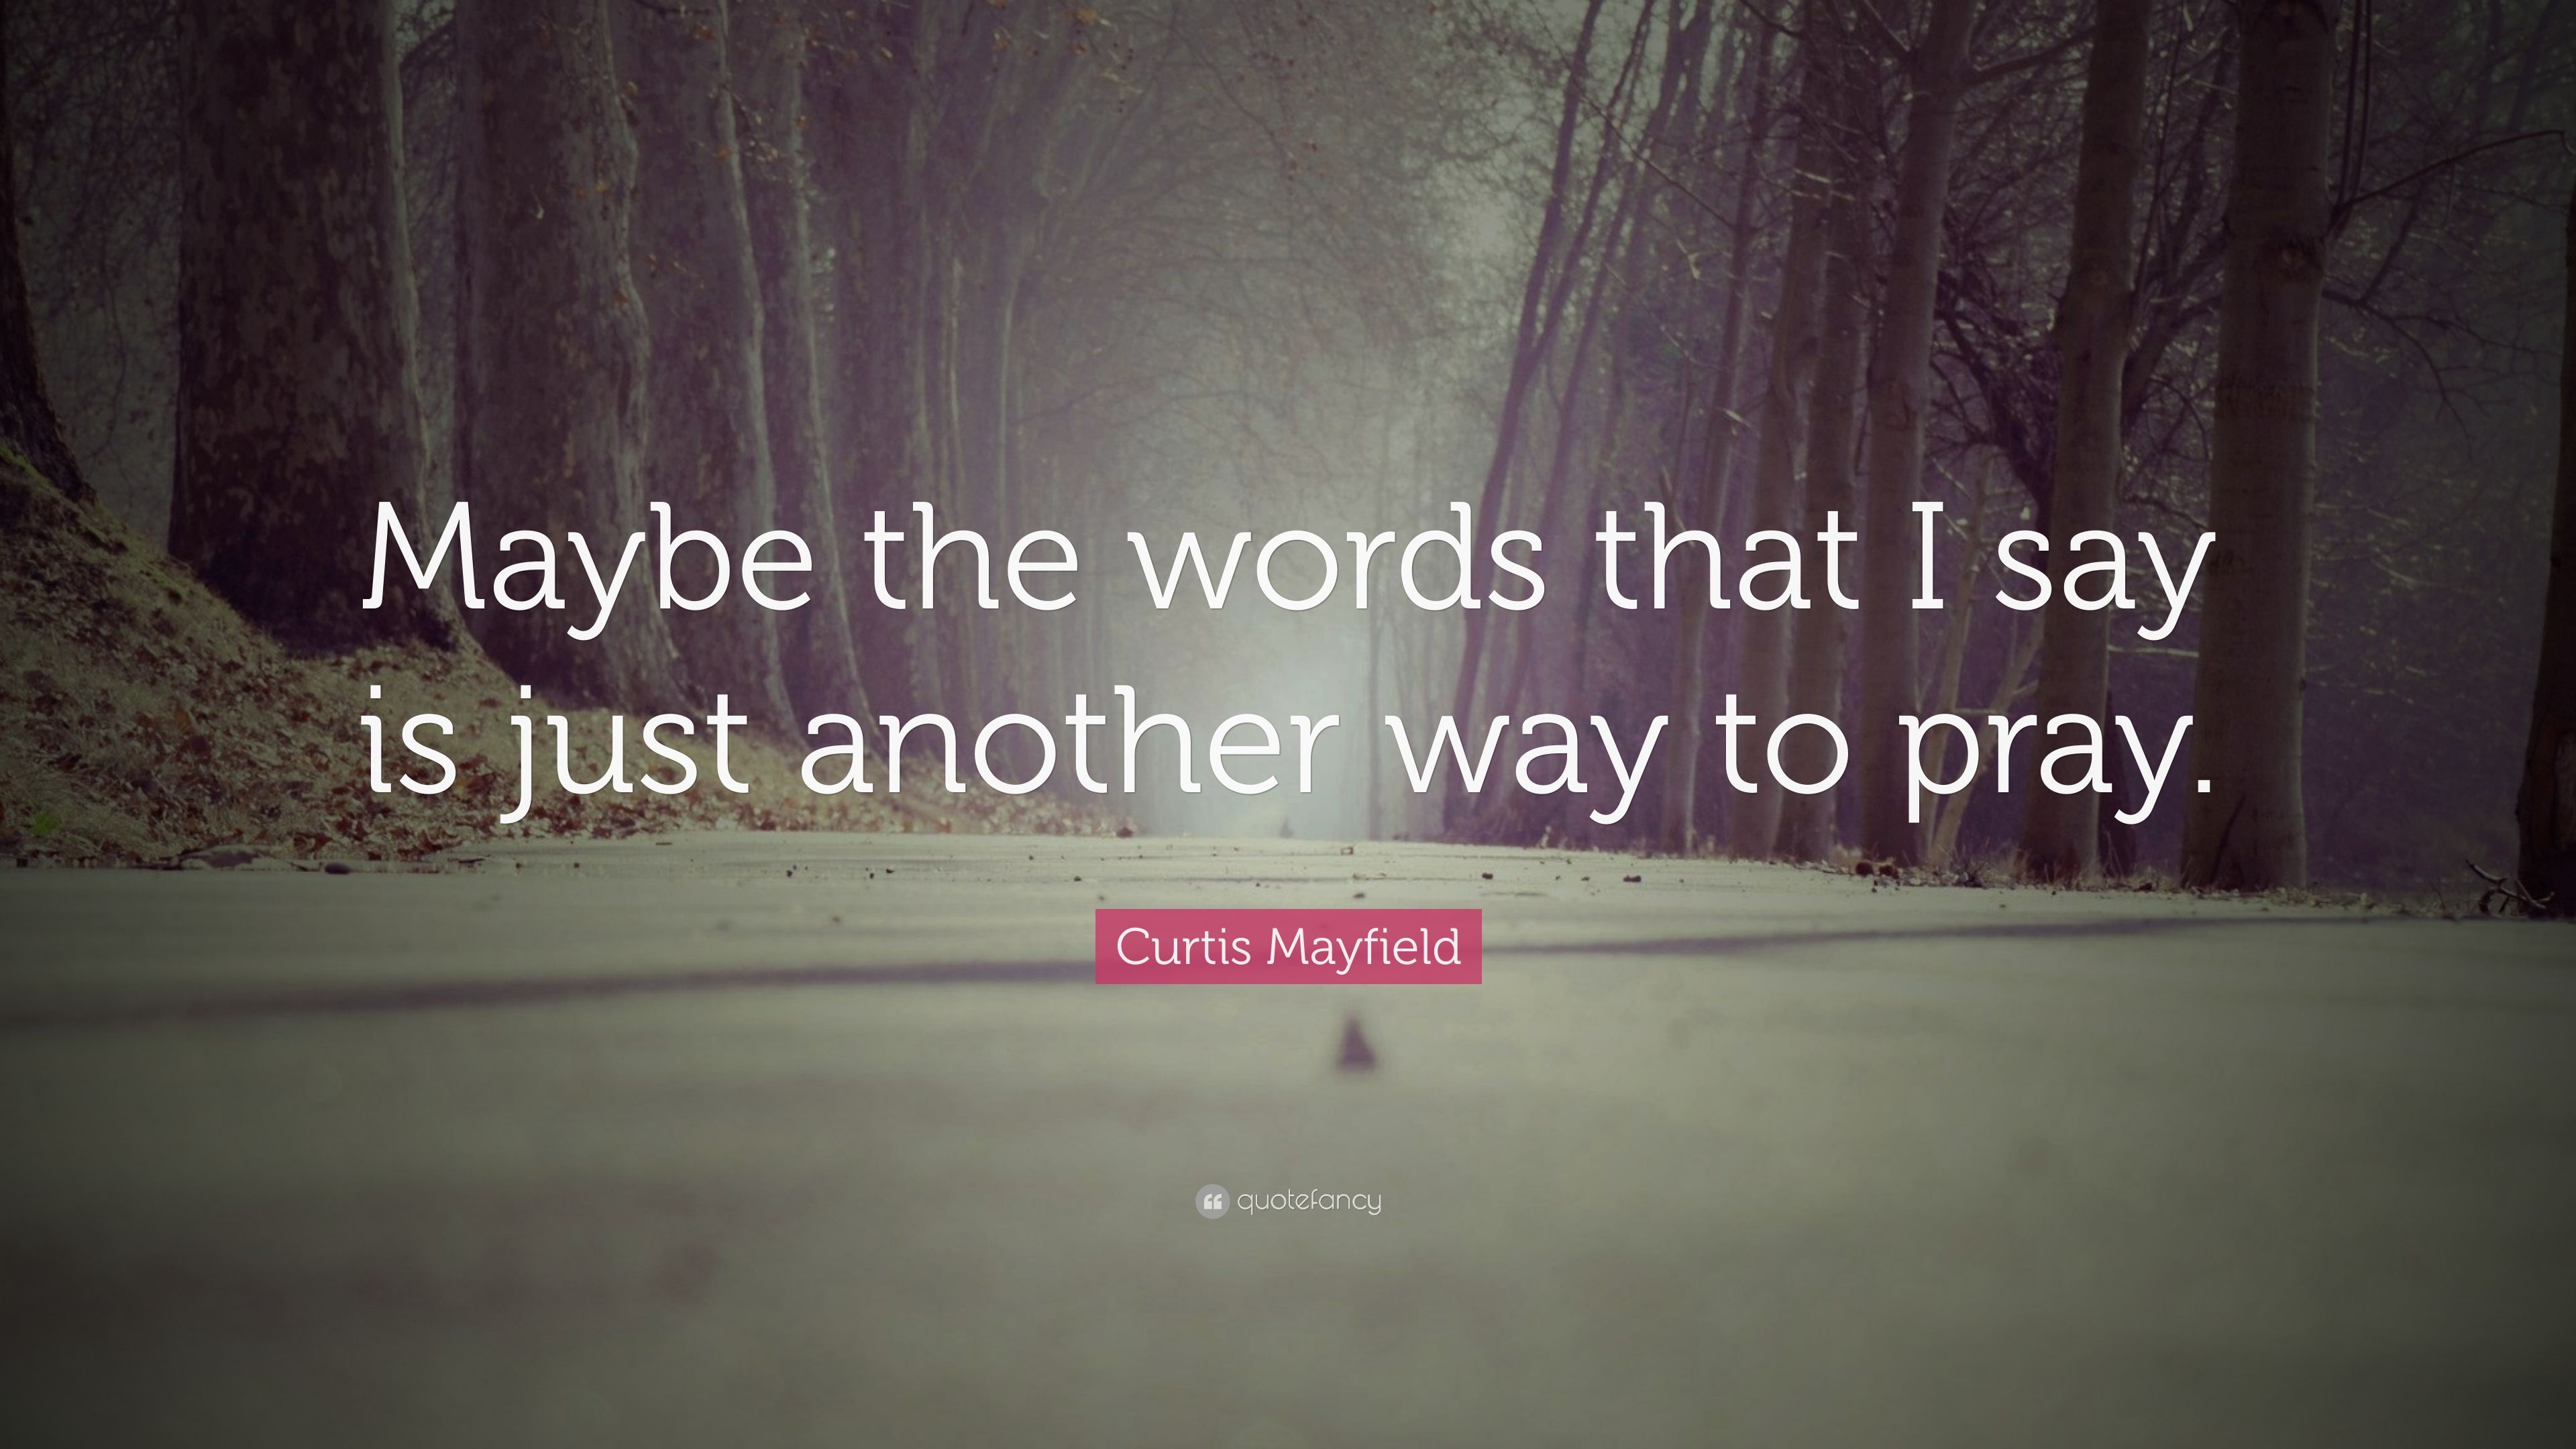 6 Curtis Mayfield Quotes About Life